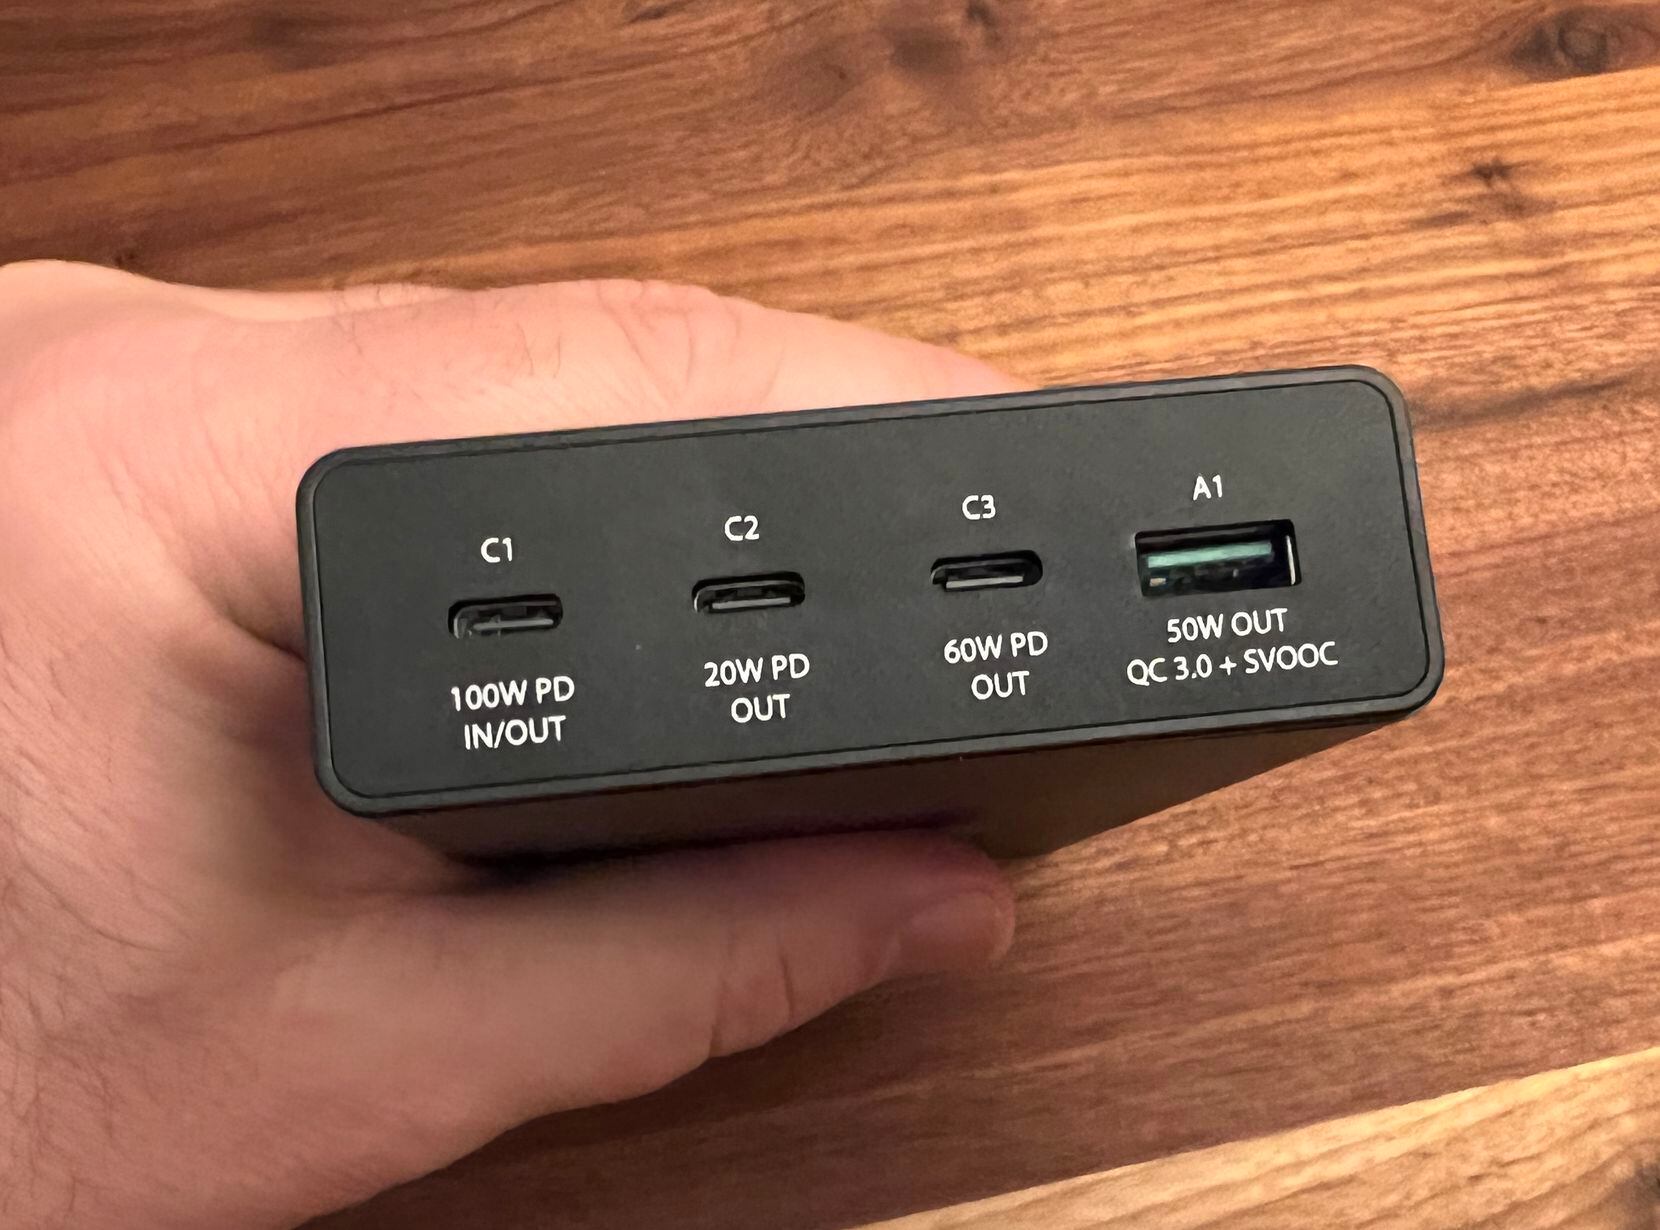 The USB ports on the Chargeasap Flash Pro